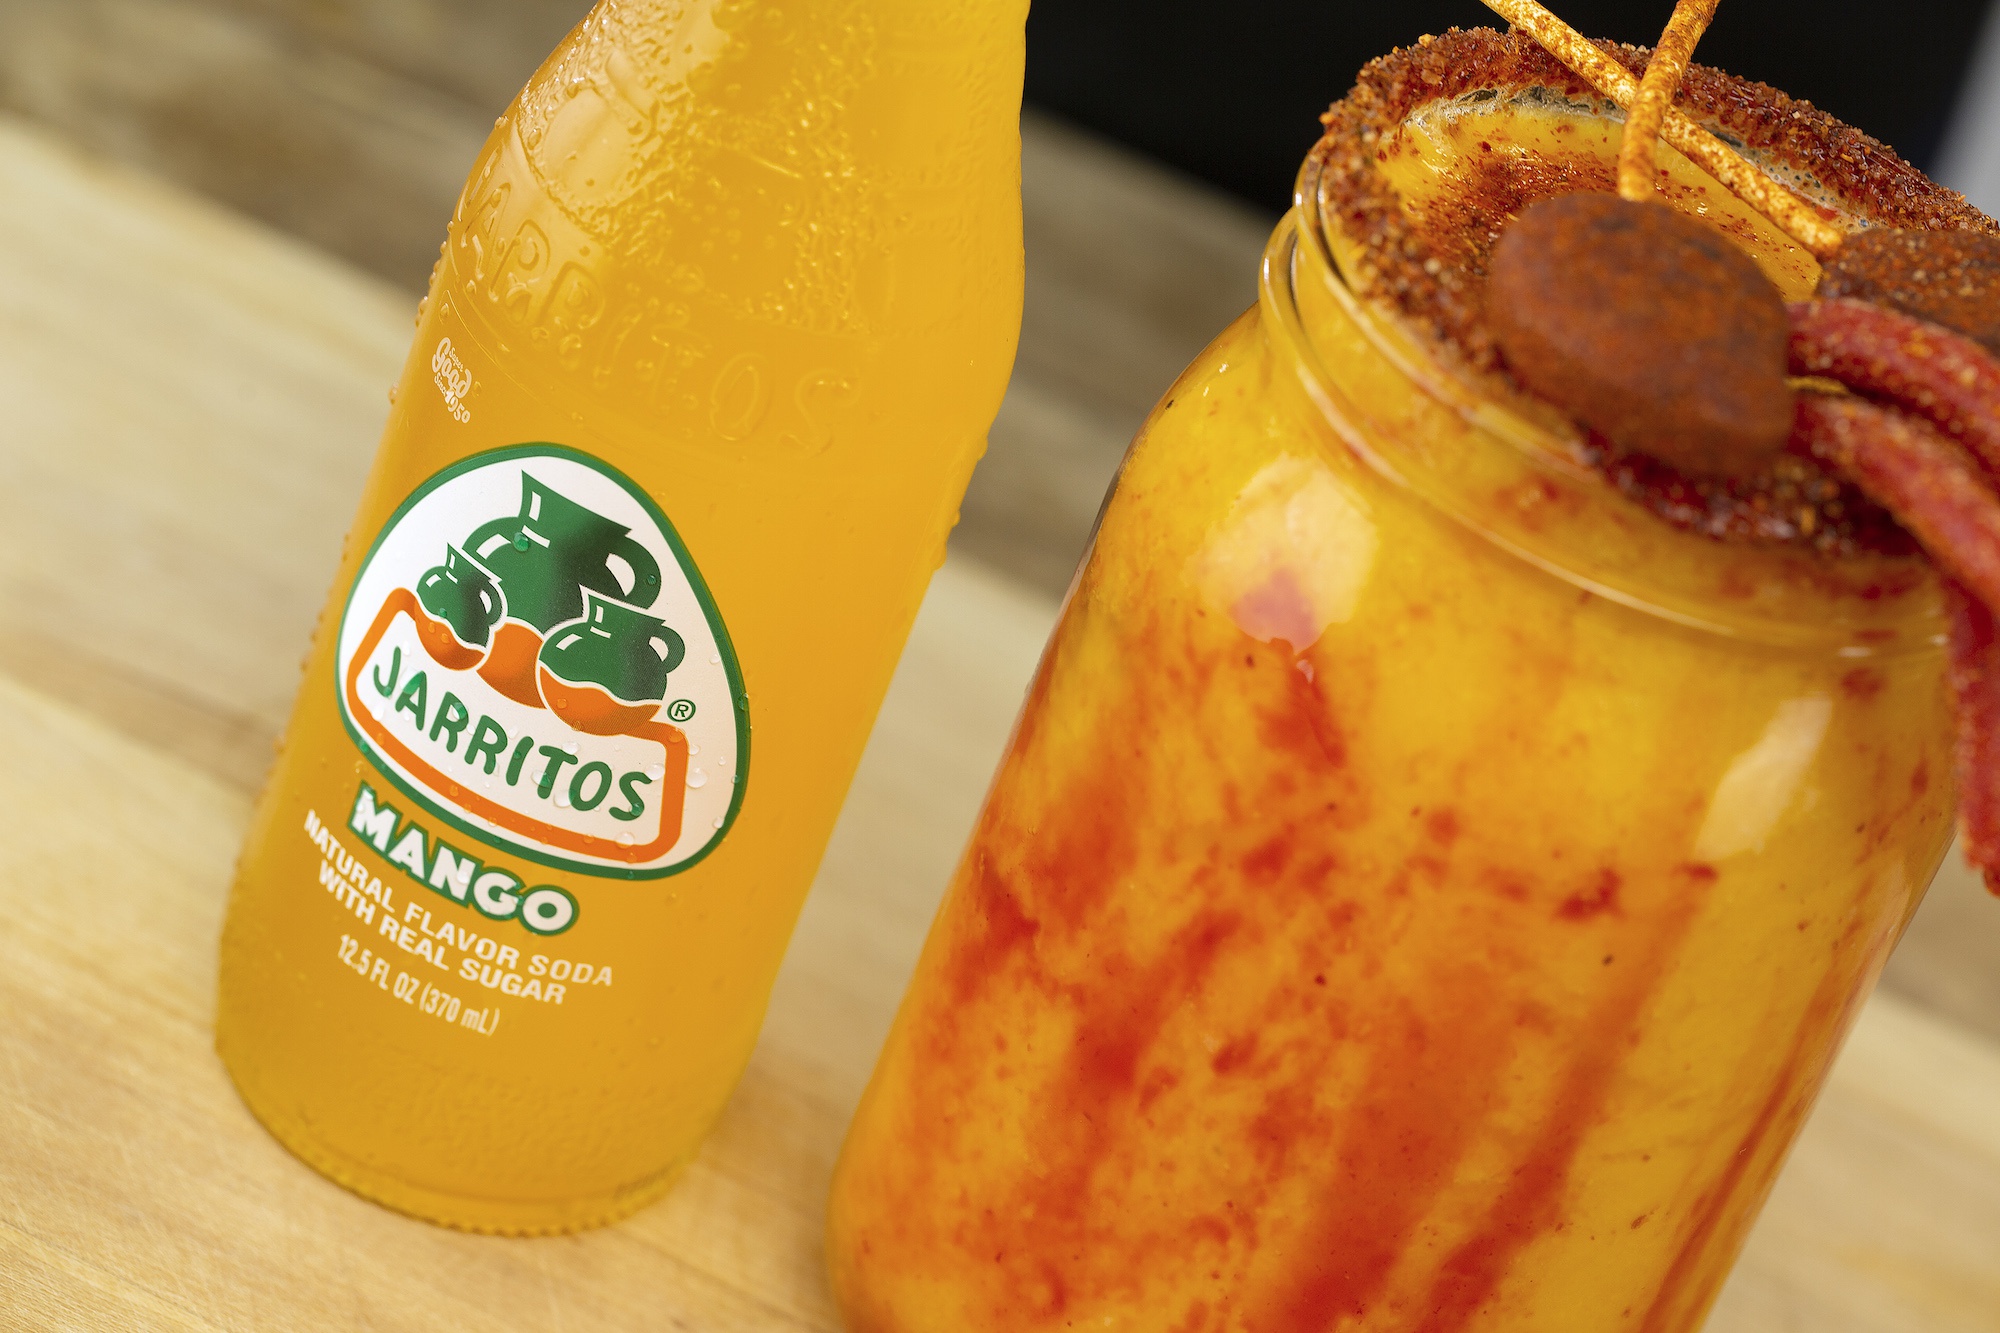 A Symphony of Flavors: Jarritos Introduces Alcoholic Harmony